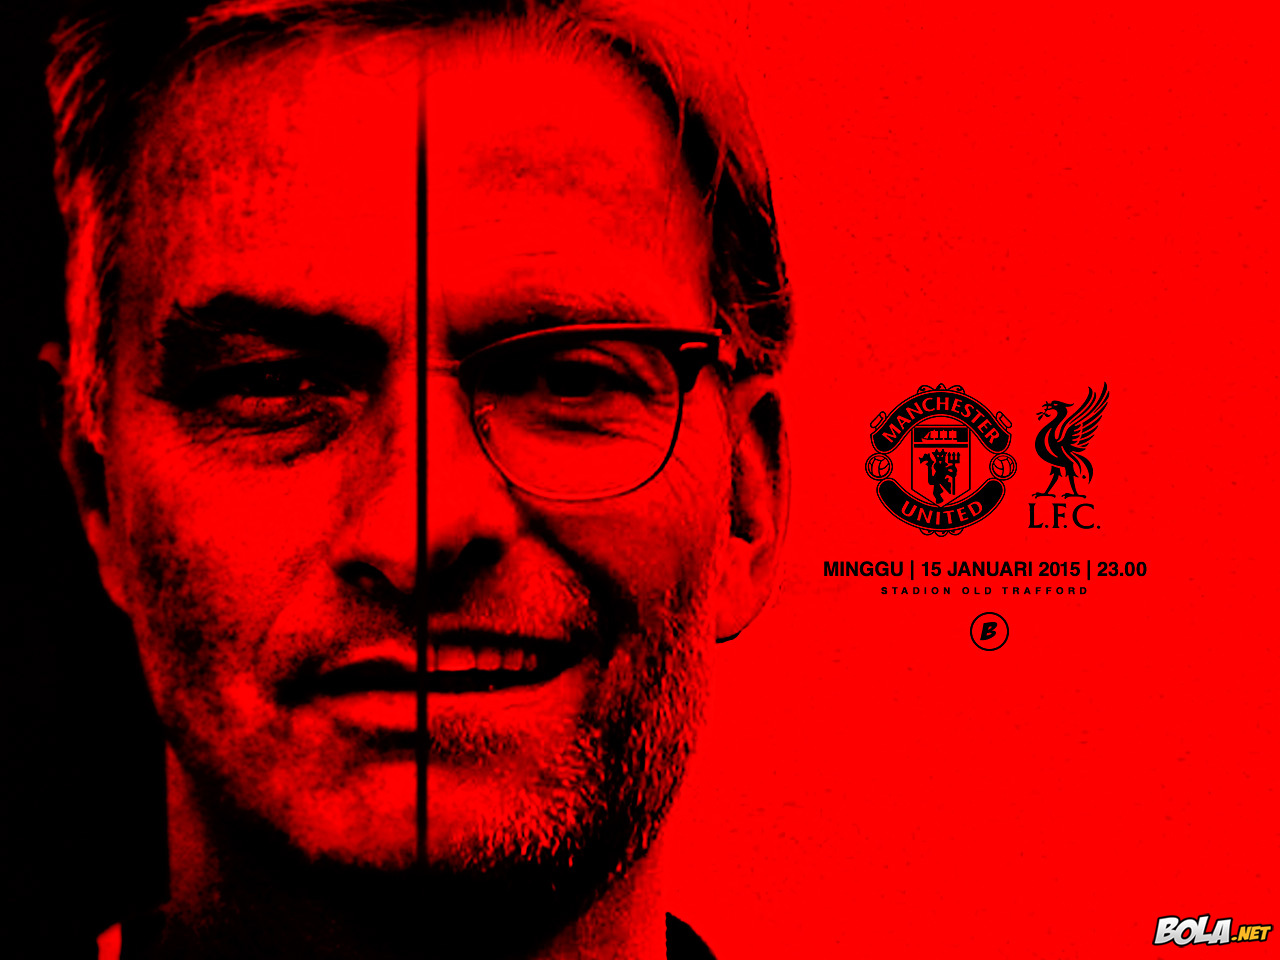 Download Wallpaper Manchester United Vs Liverpool Bolanet